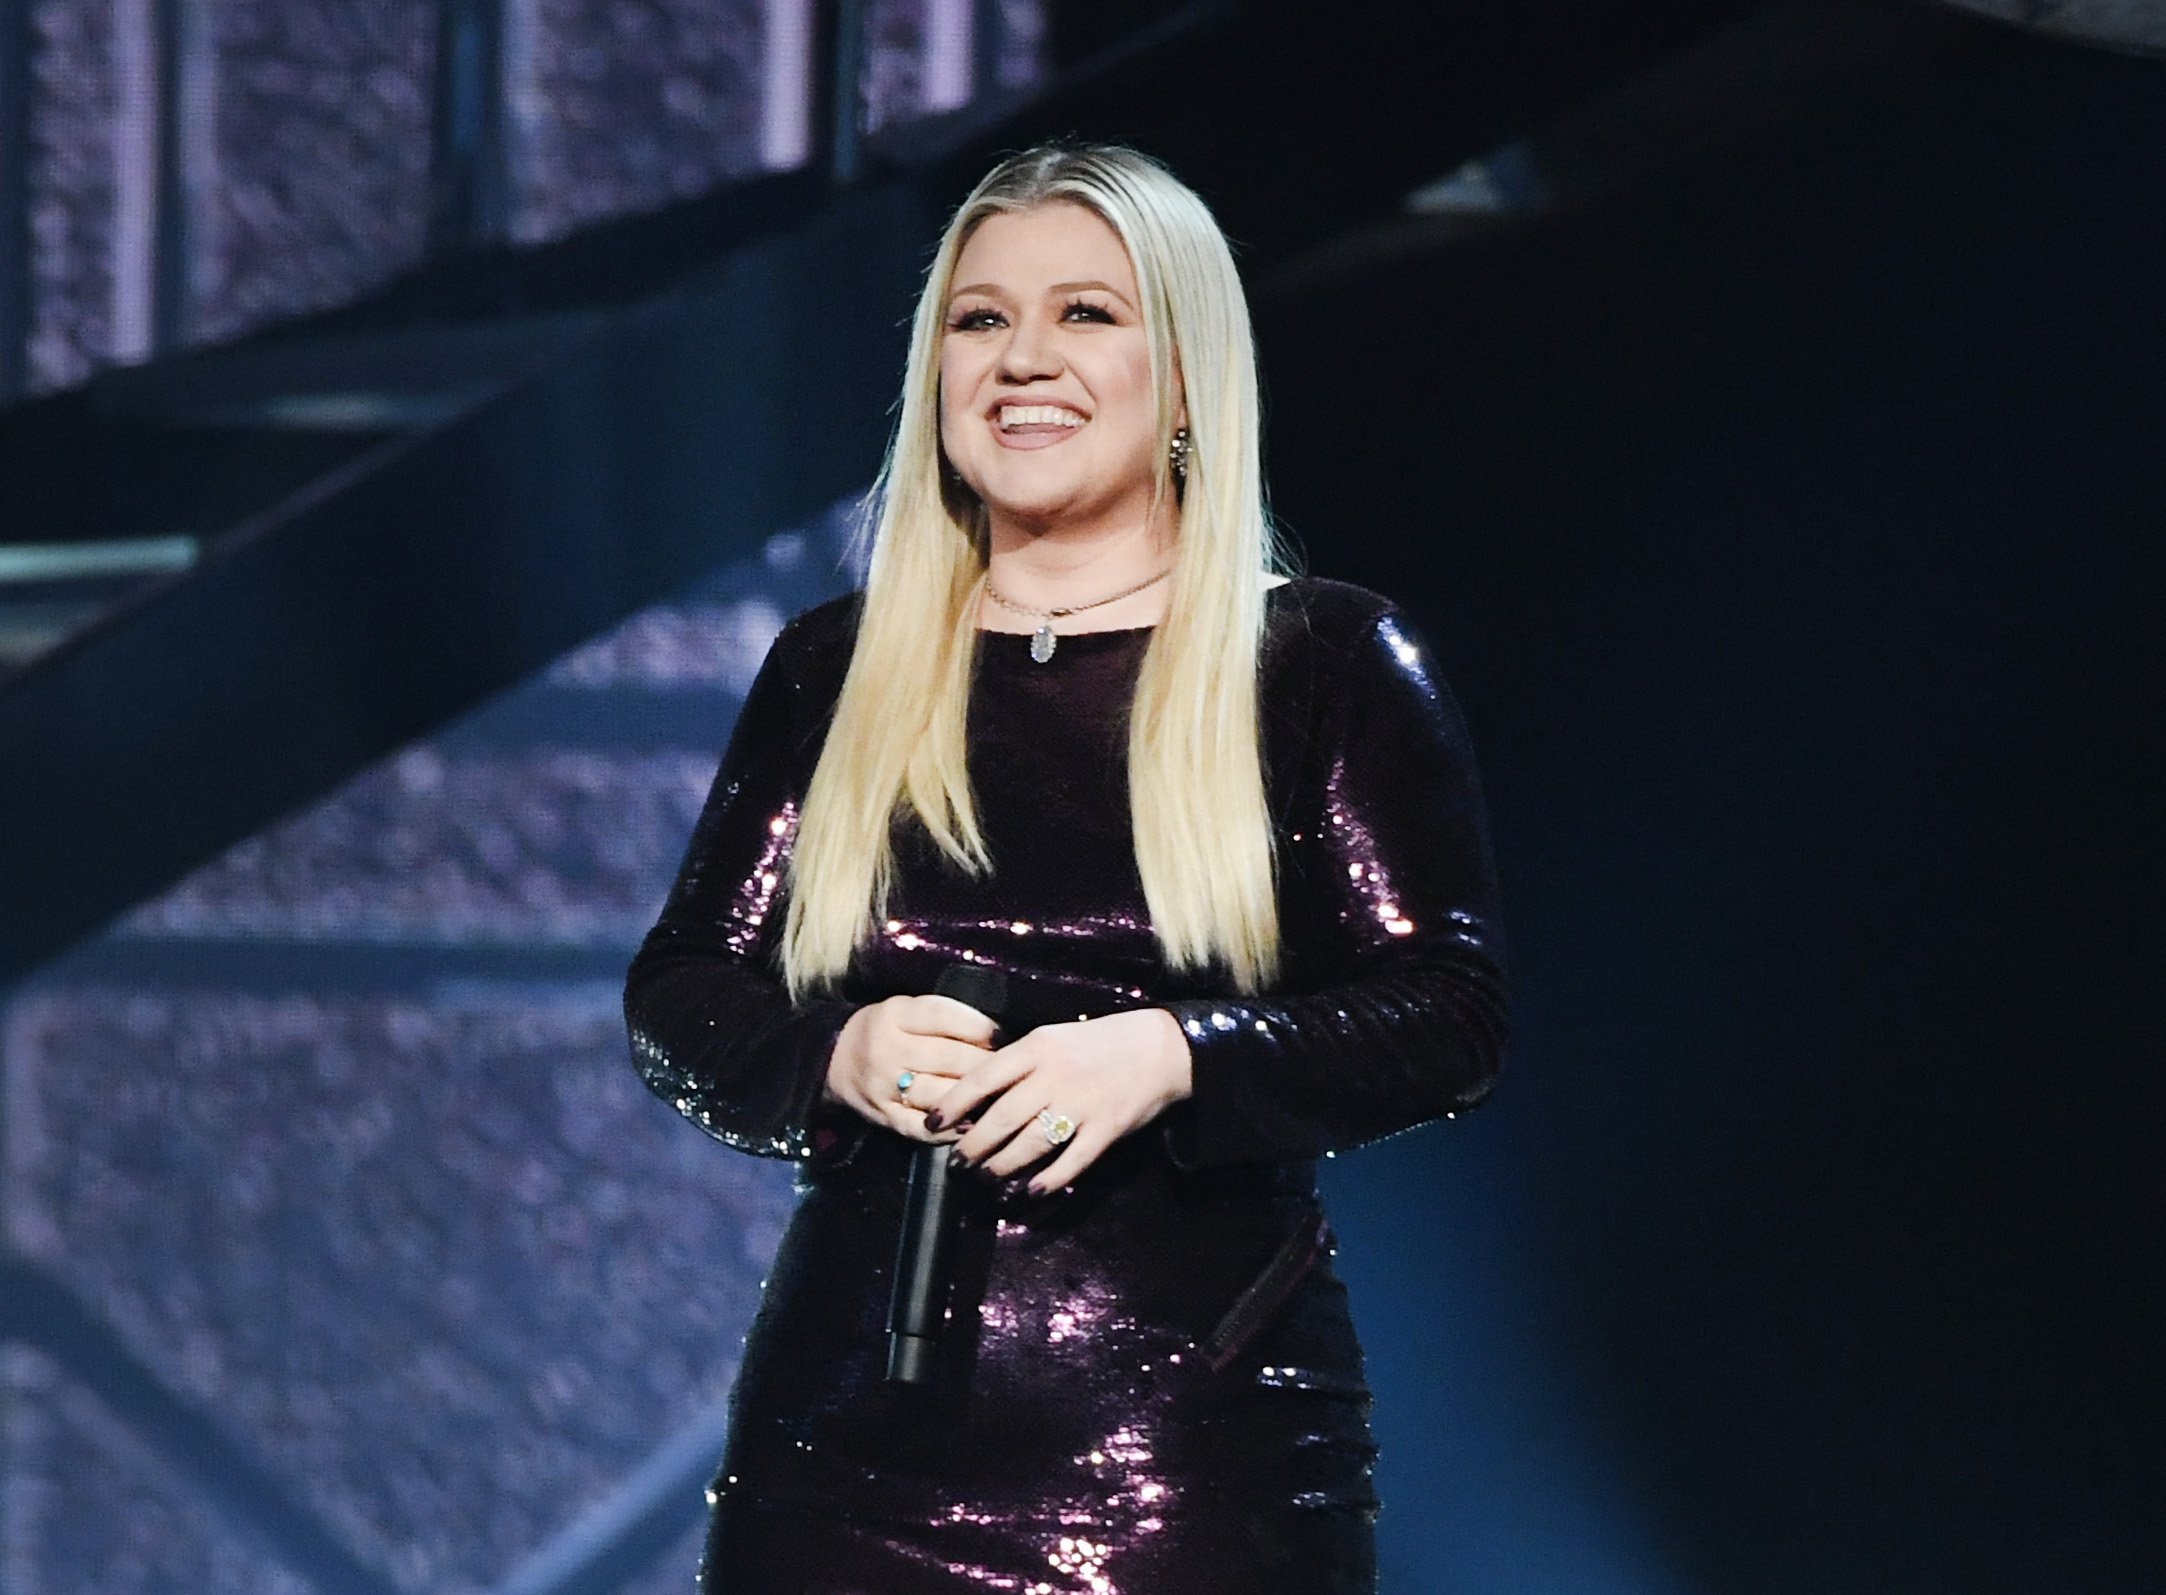 Kelly Clarkson performs onstage during the 53rd Academy of Country Music Awards at MGM Grand Garden Arena on April 15, 2018 in Las Vegas, Nevada | Photo: Getty Images